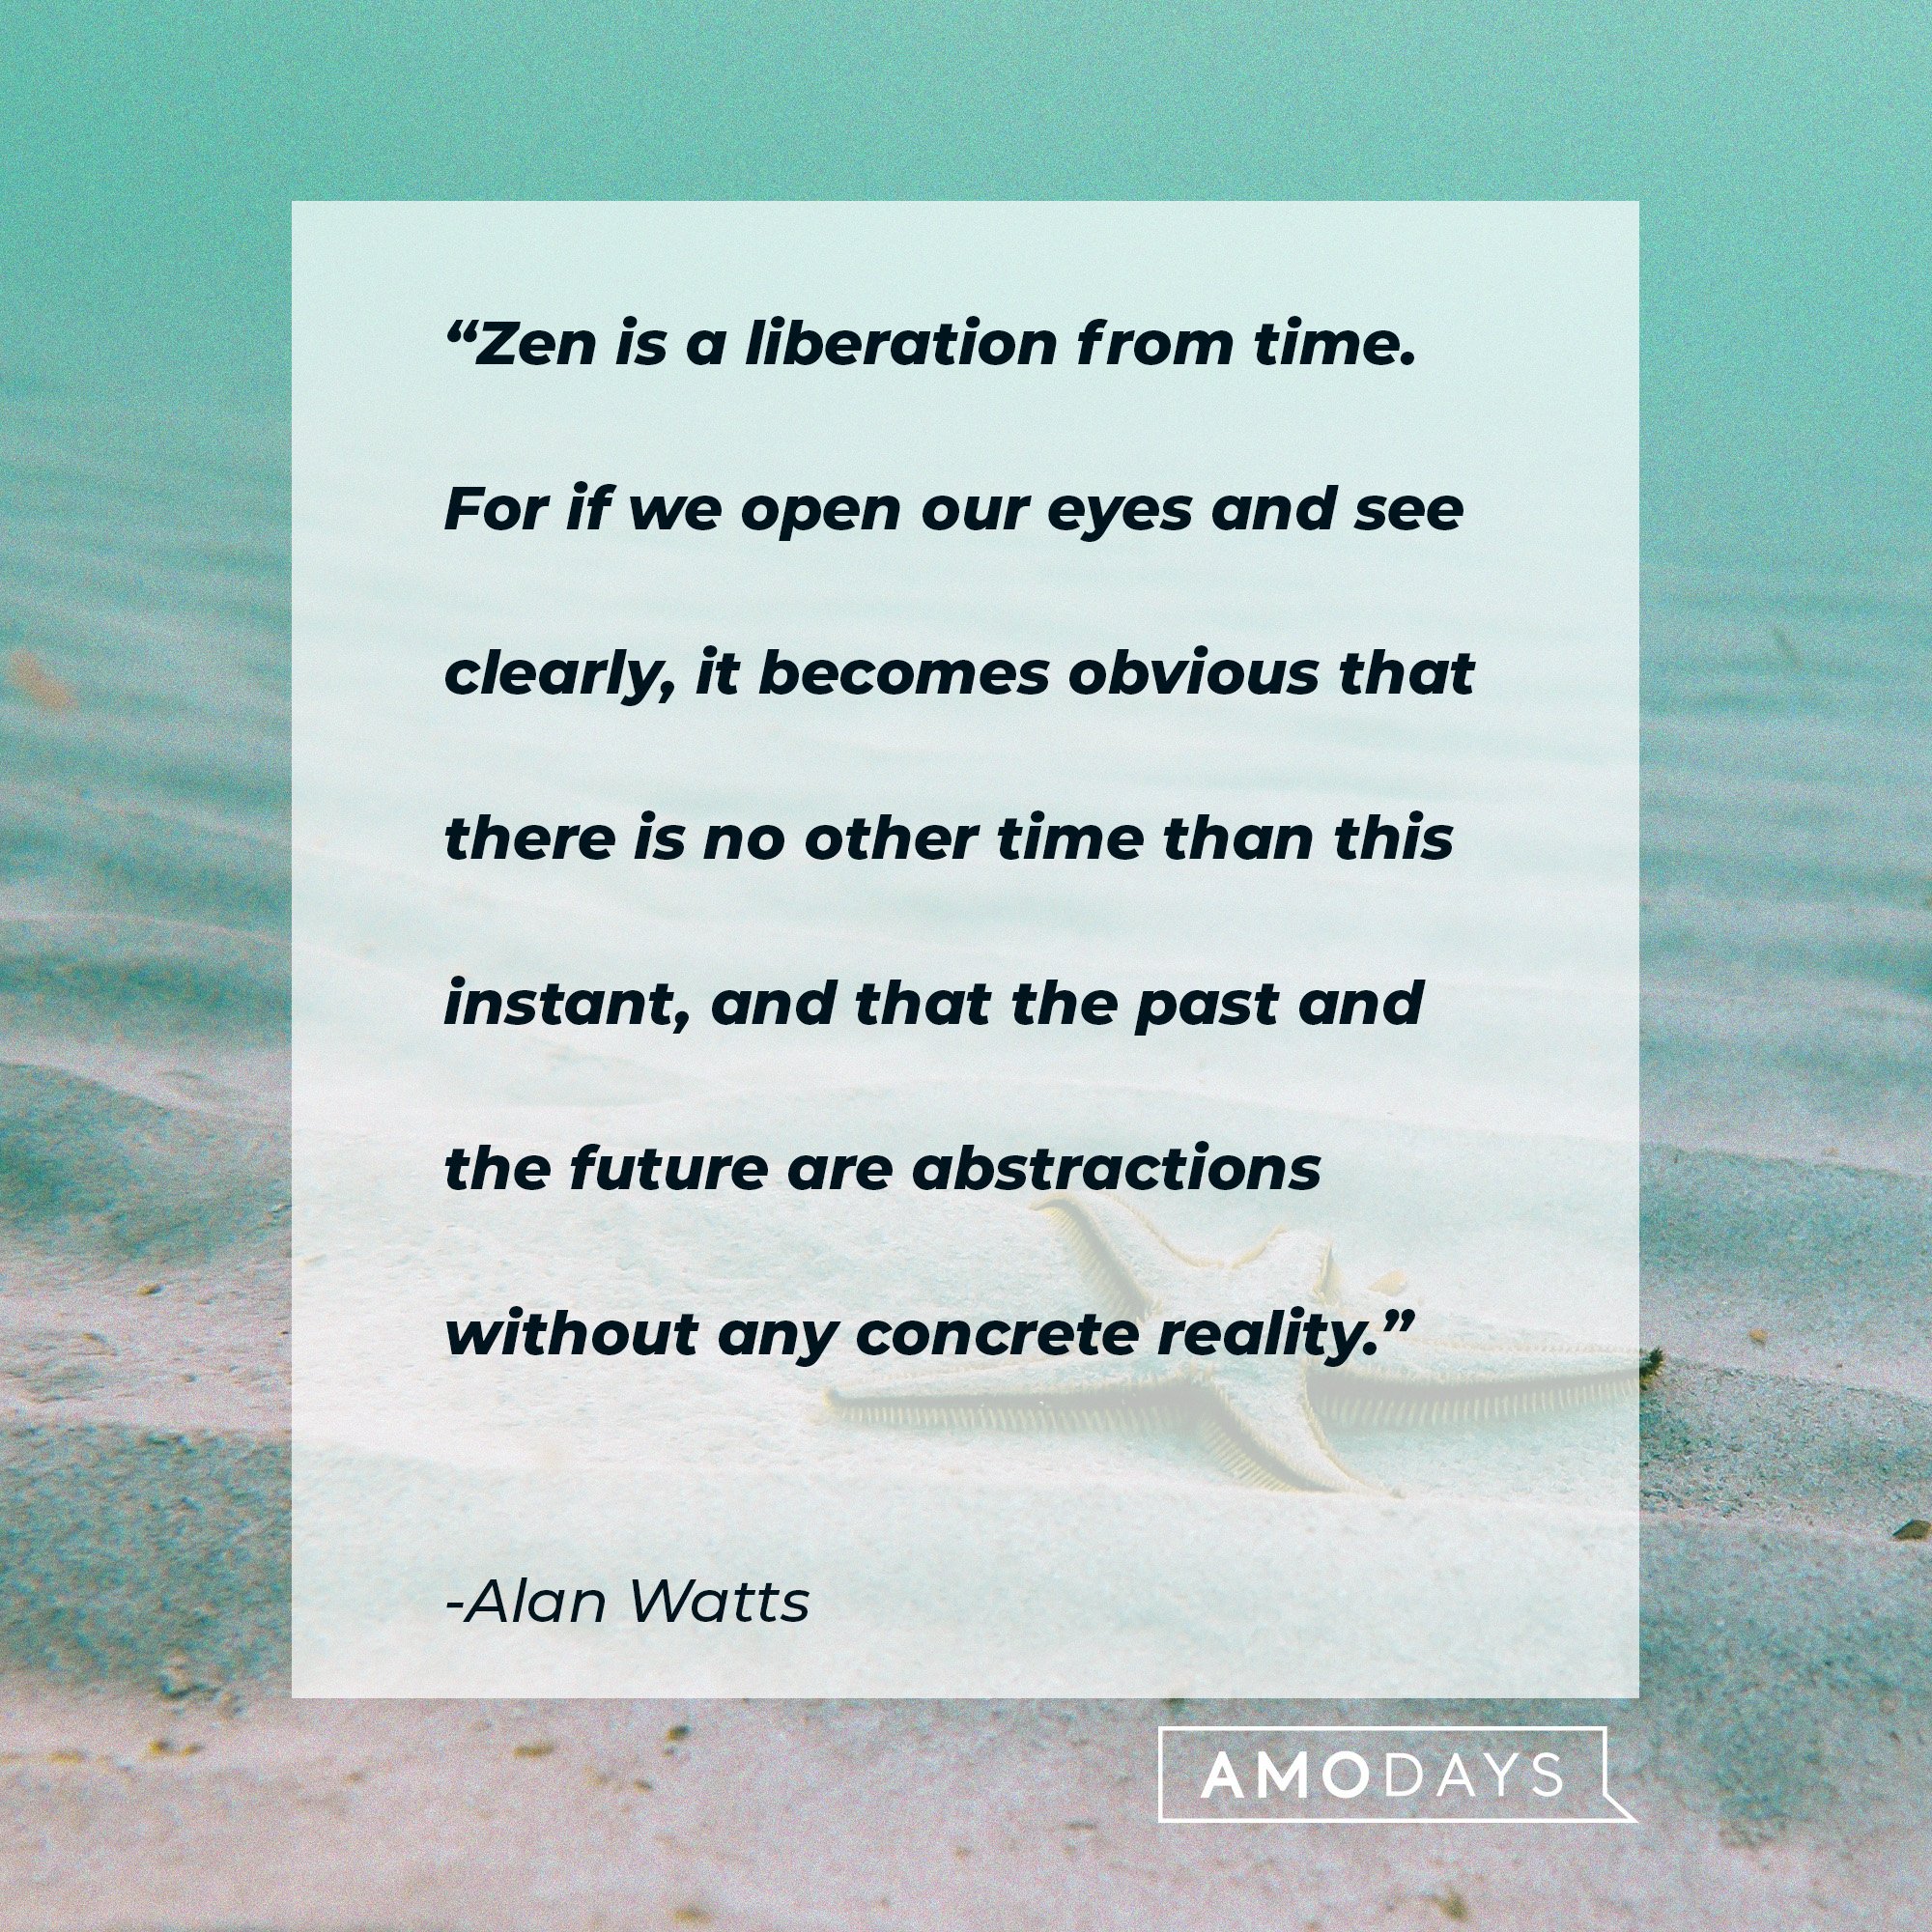  Alan Watts's quote: “Zen is a liberation from time. For if we open our eyes and see clearly, it becomes obvious that there is no other time than this instant, and that the past and the future are abstractions without any concrete reality.” | Image: AmoDays